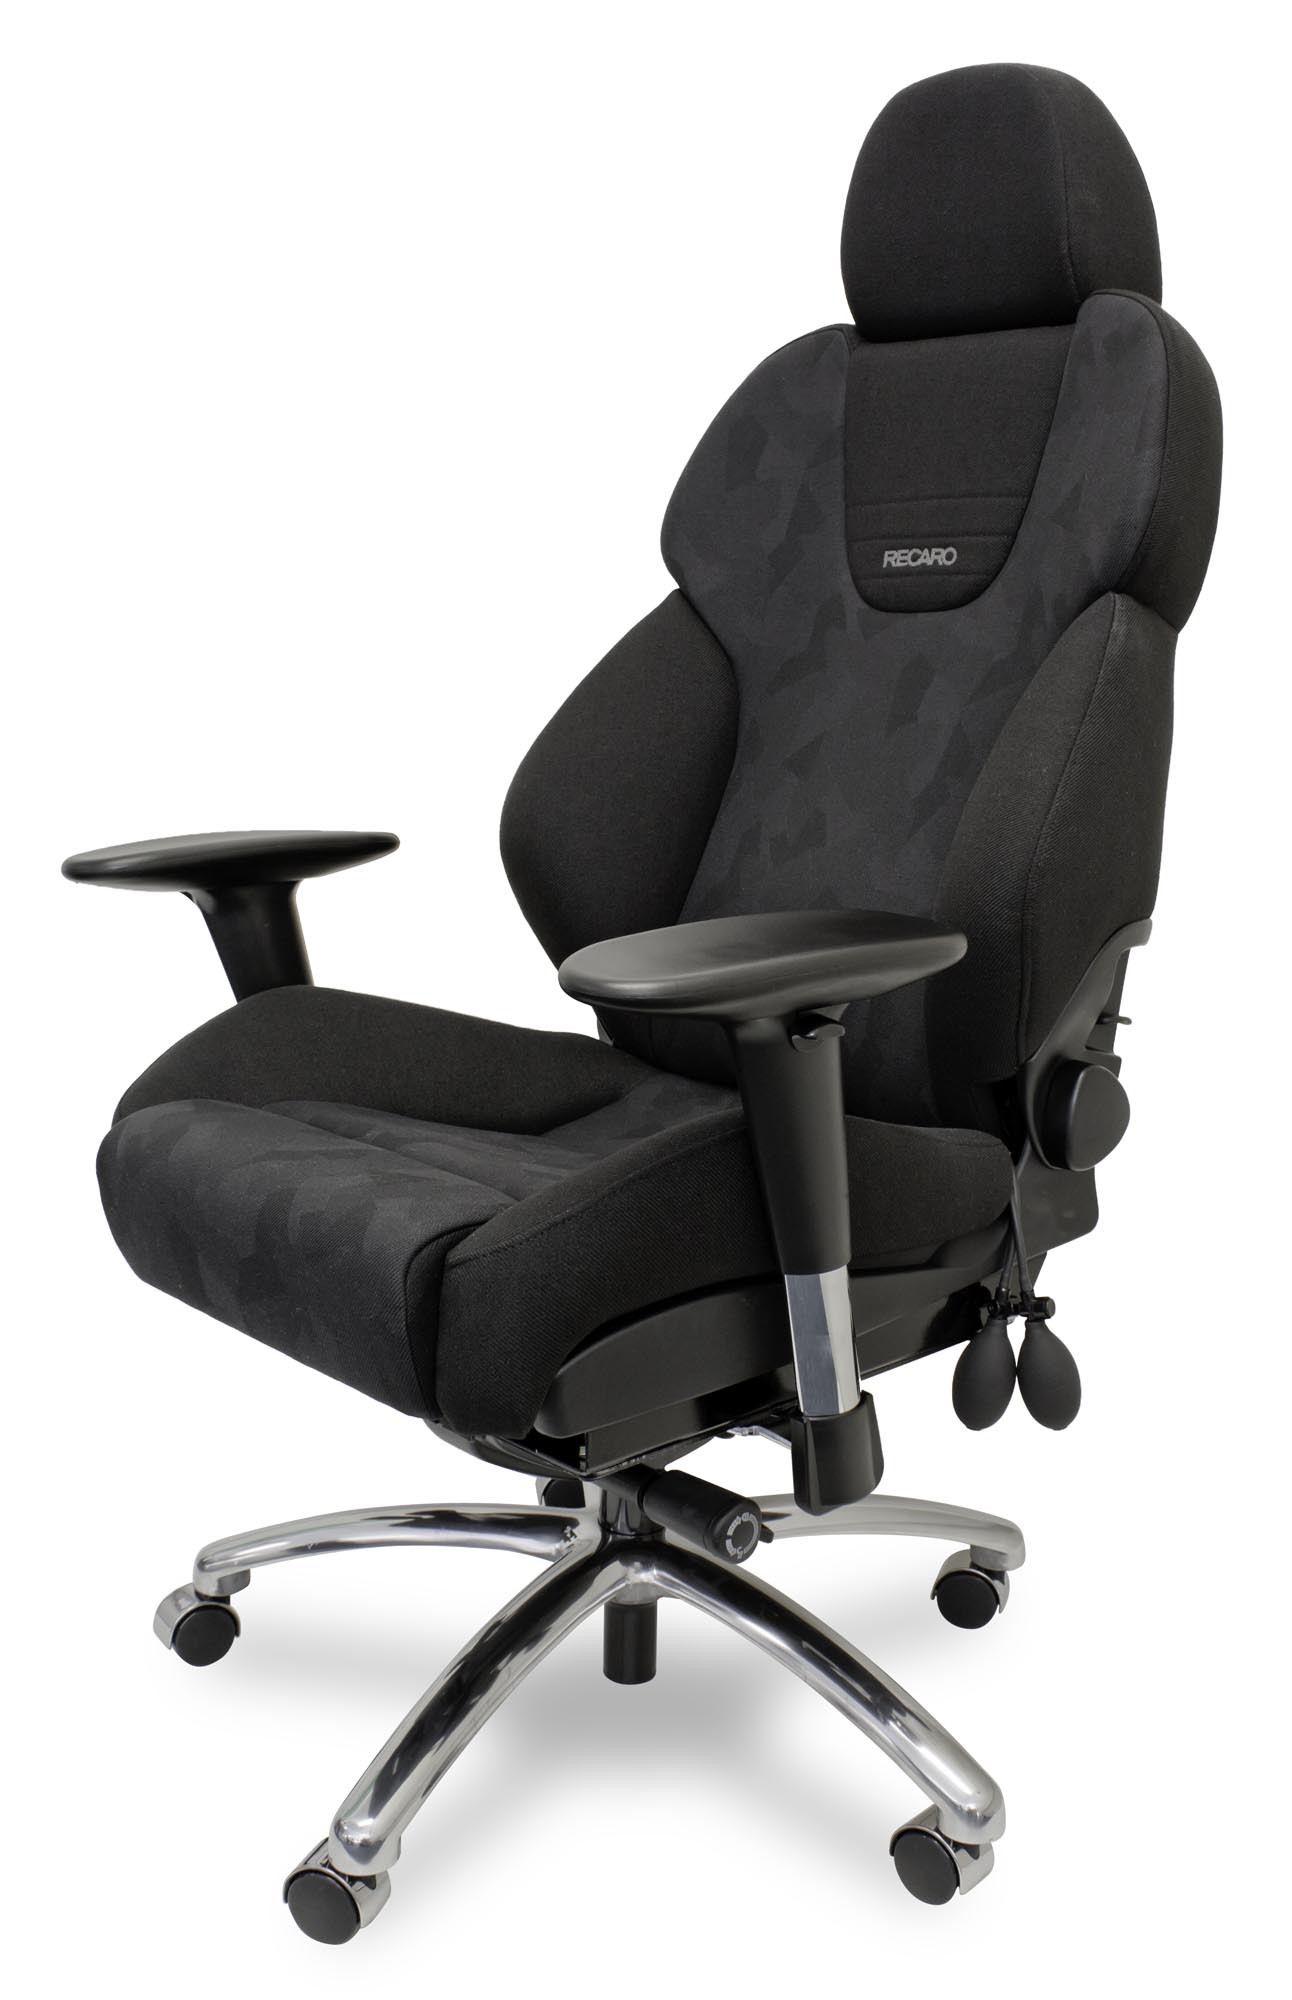 comfortable office chair full size of office furniture:best office chairs best comfortable office  chairs office OJGCGRS